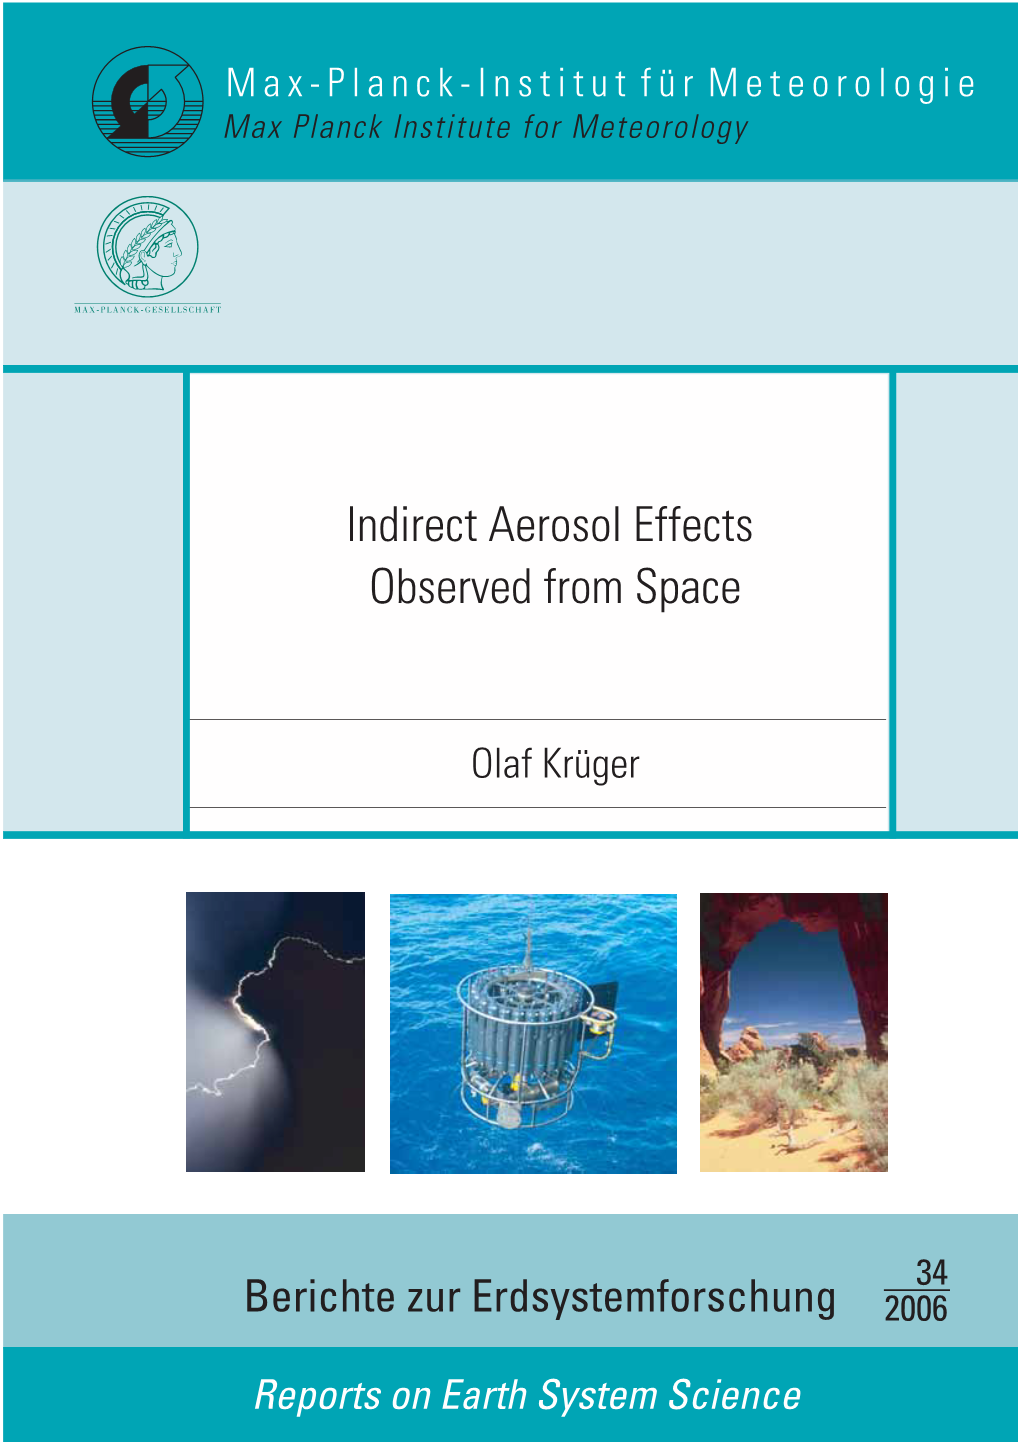 Indirect Aerosol Effects Observed from Space